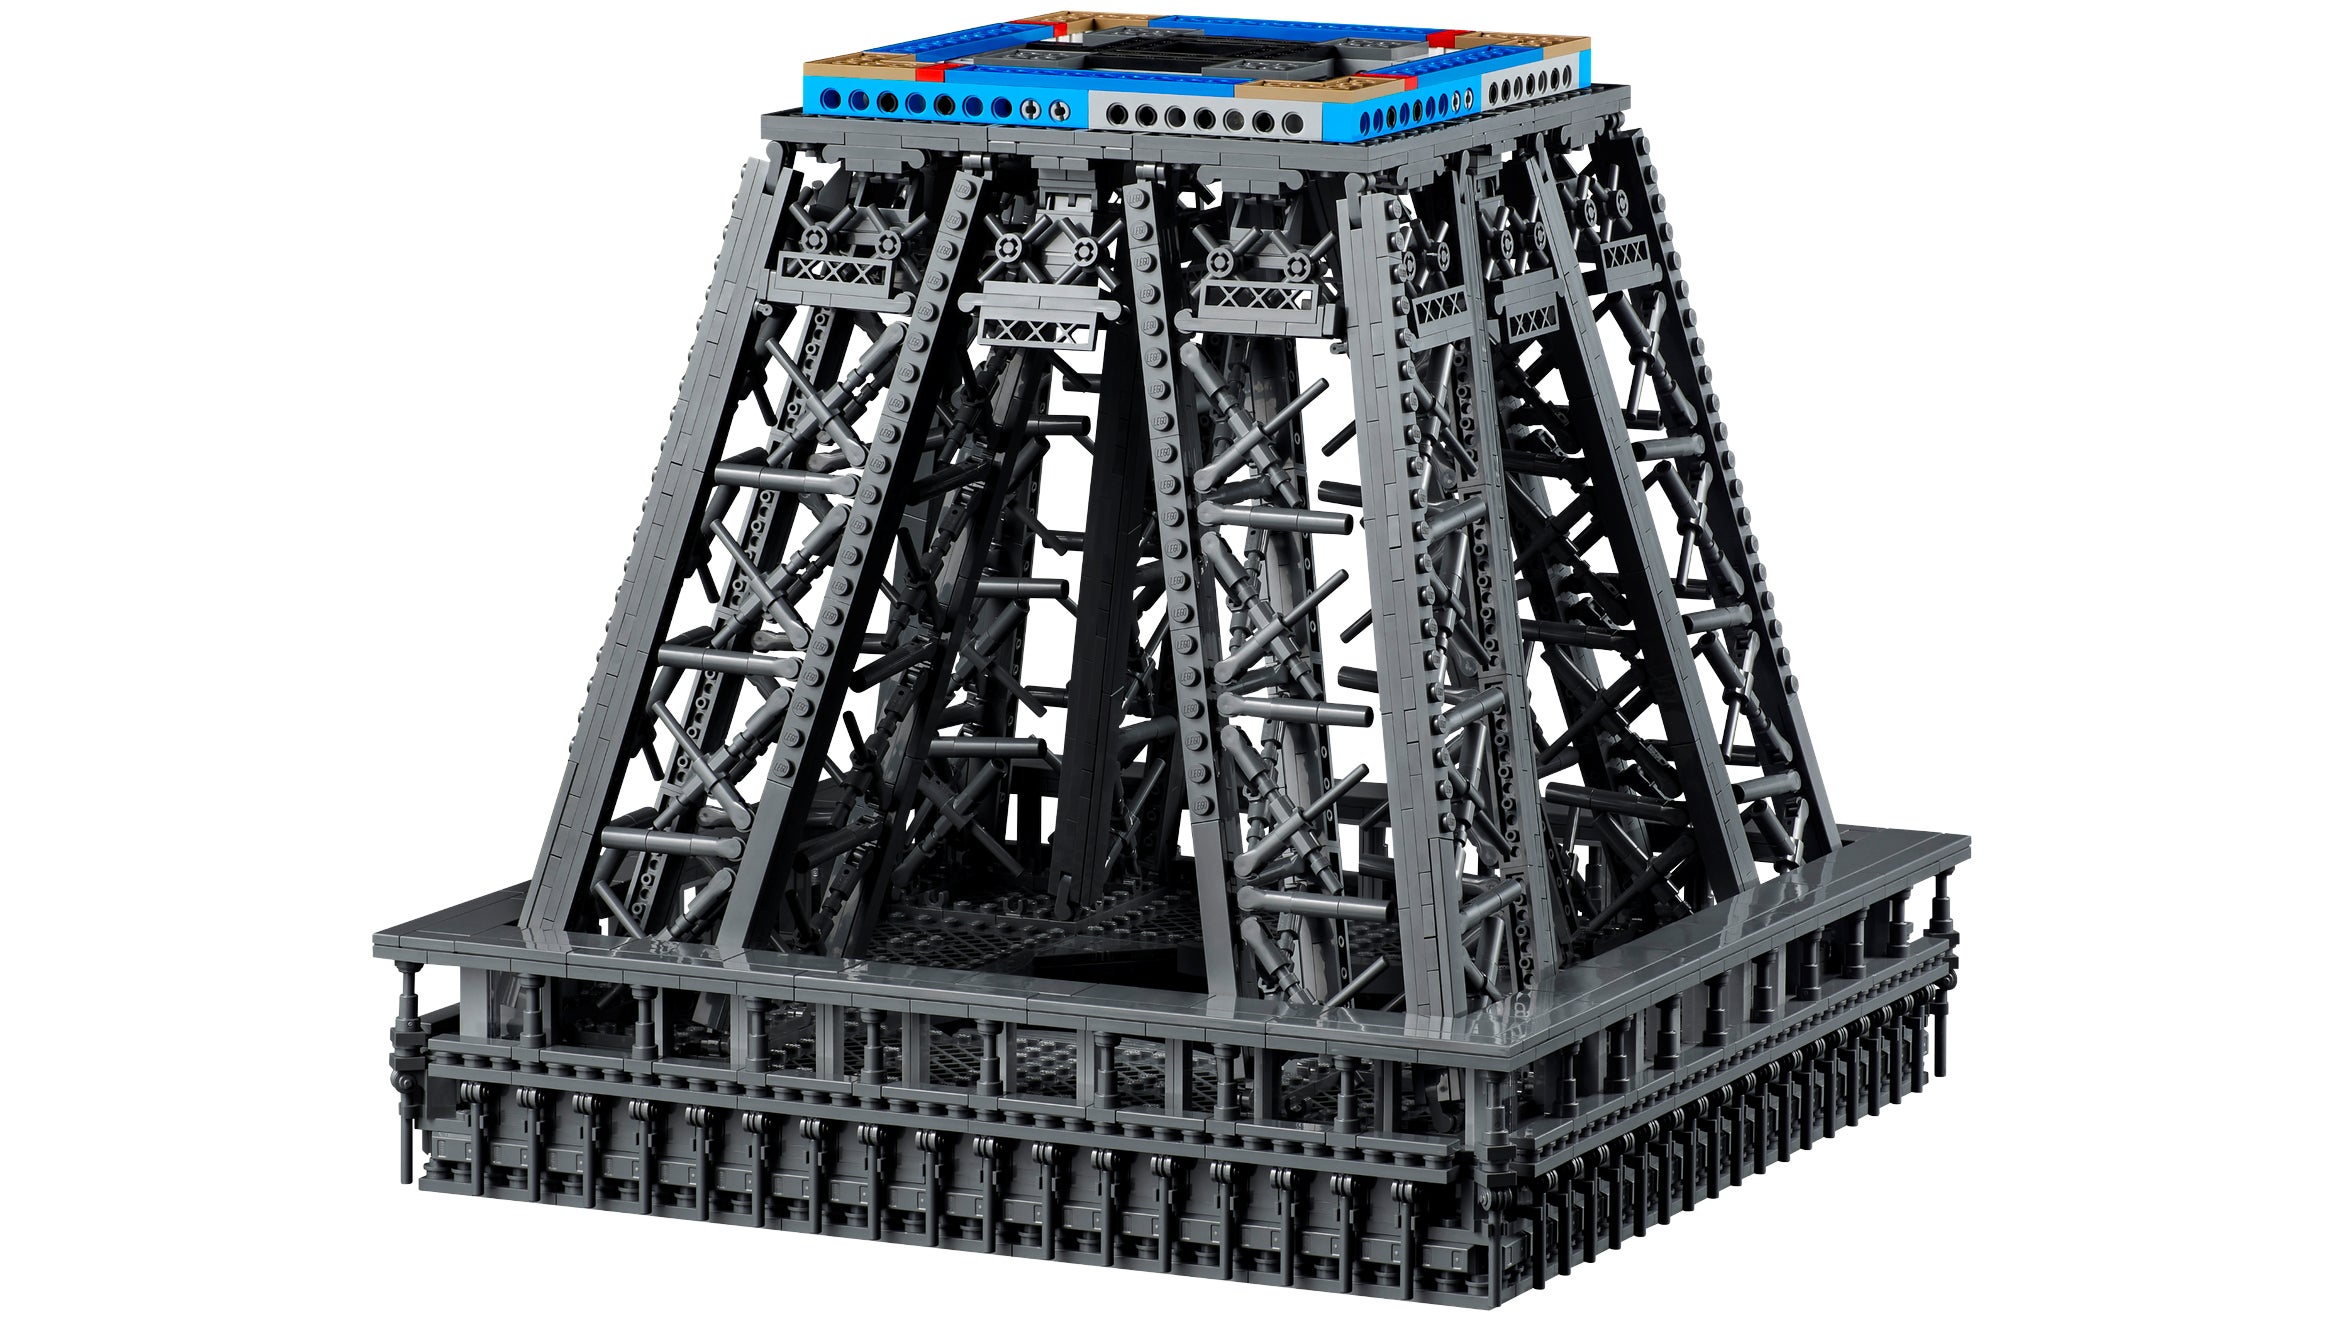 The Massive Five-Foot Tall Eiffel Tower Is the Tallest LEGO Set of All Time